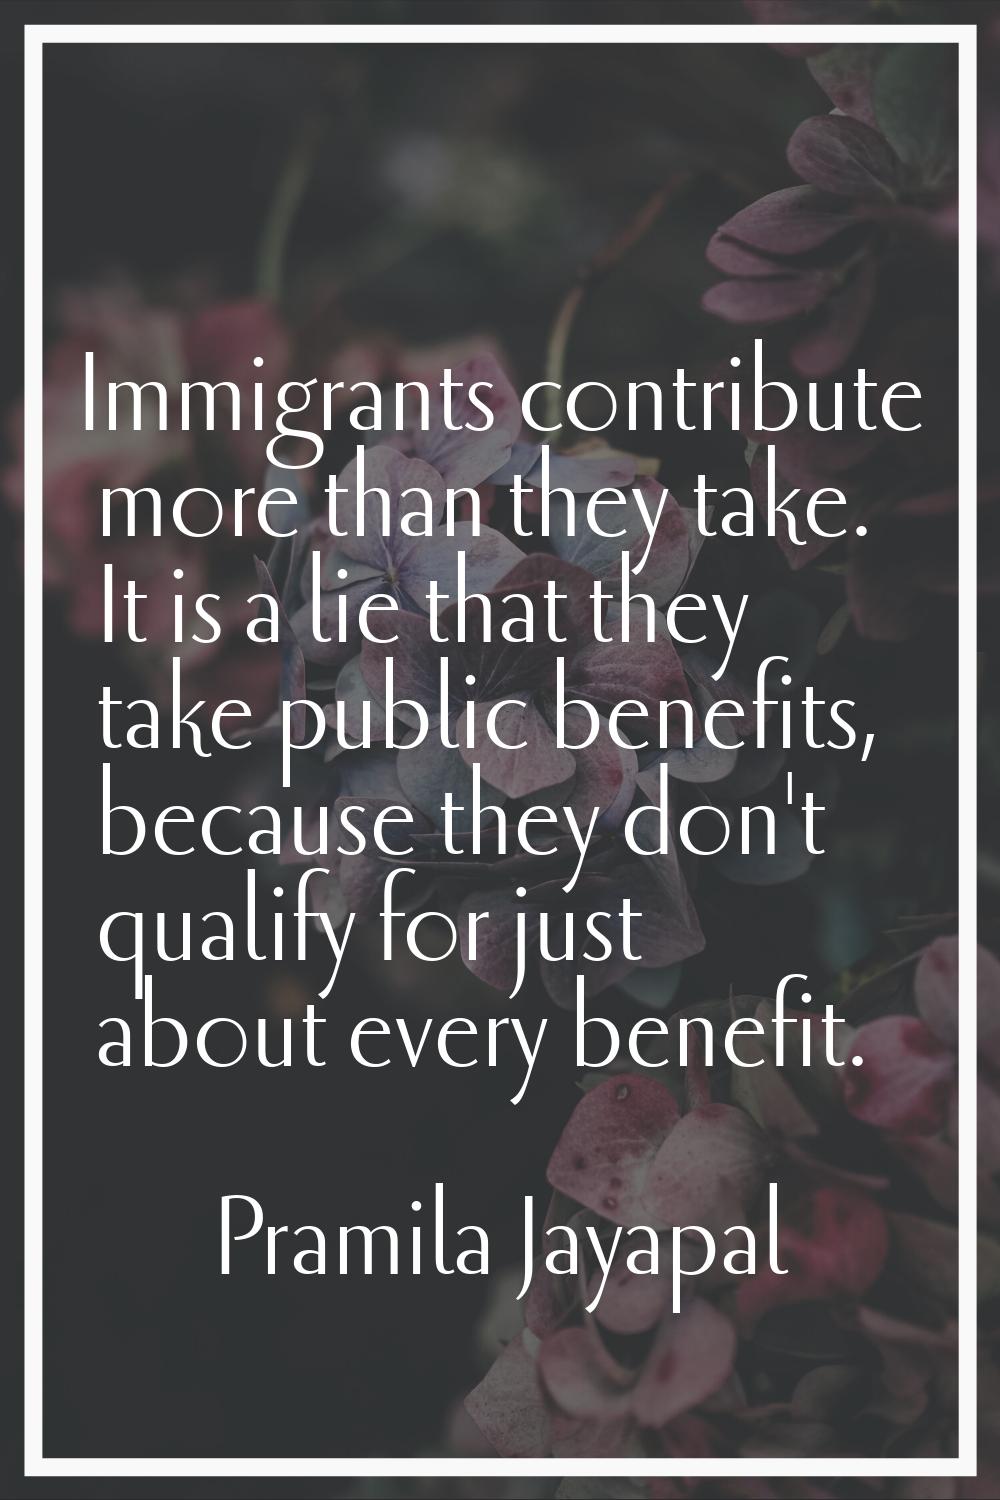 Immigrants contribute more than they take. It is a lie that they take public benefits, because they